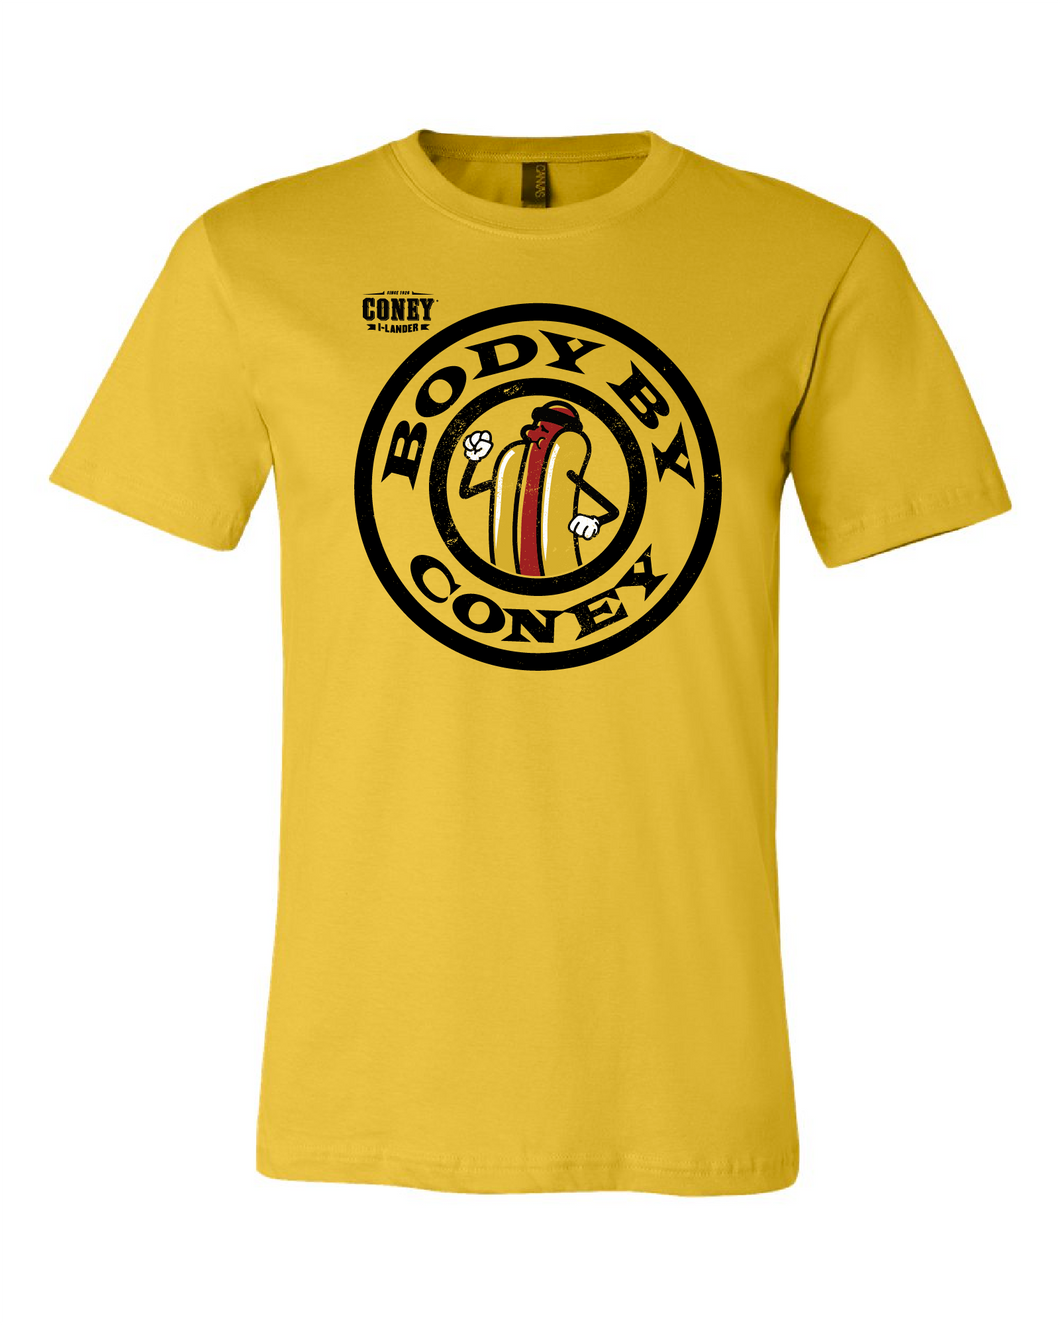 Body By Coney Shirt